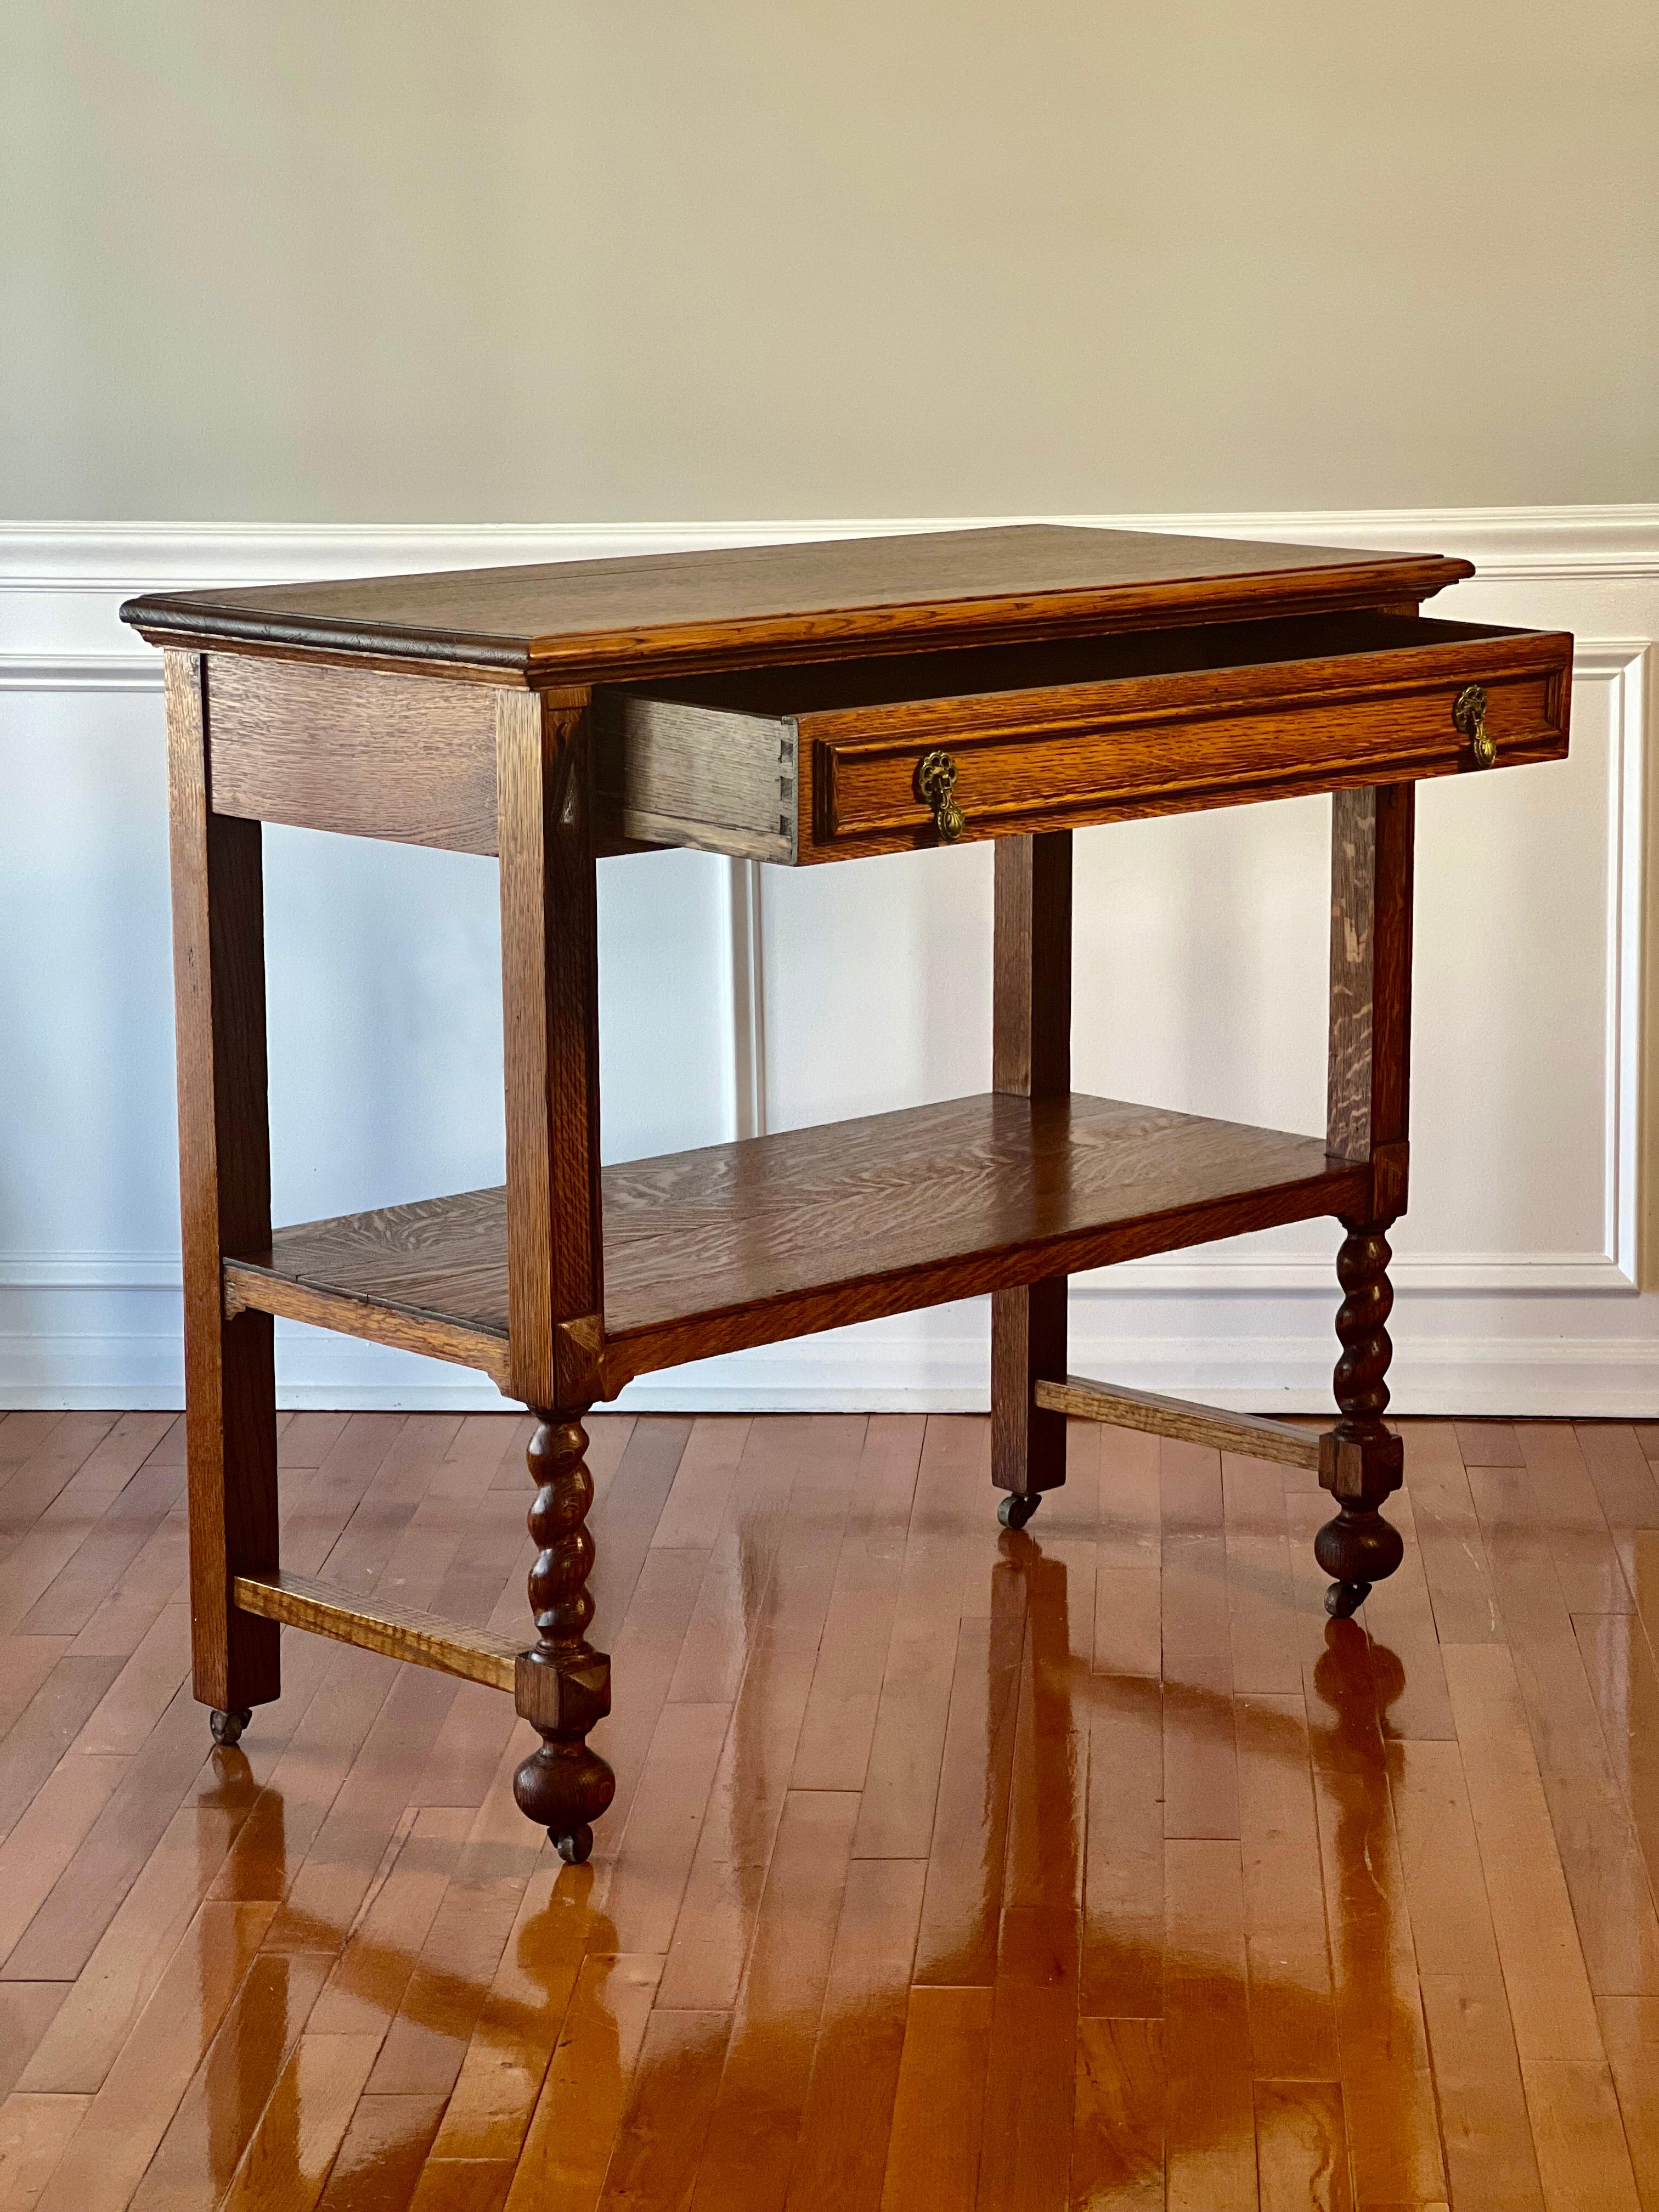 Early 20th Century English Quarter Sawn Oak Two-Tier Server on Casters In Good Condition For Sale In Doylestown, PA